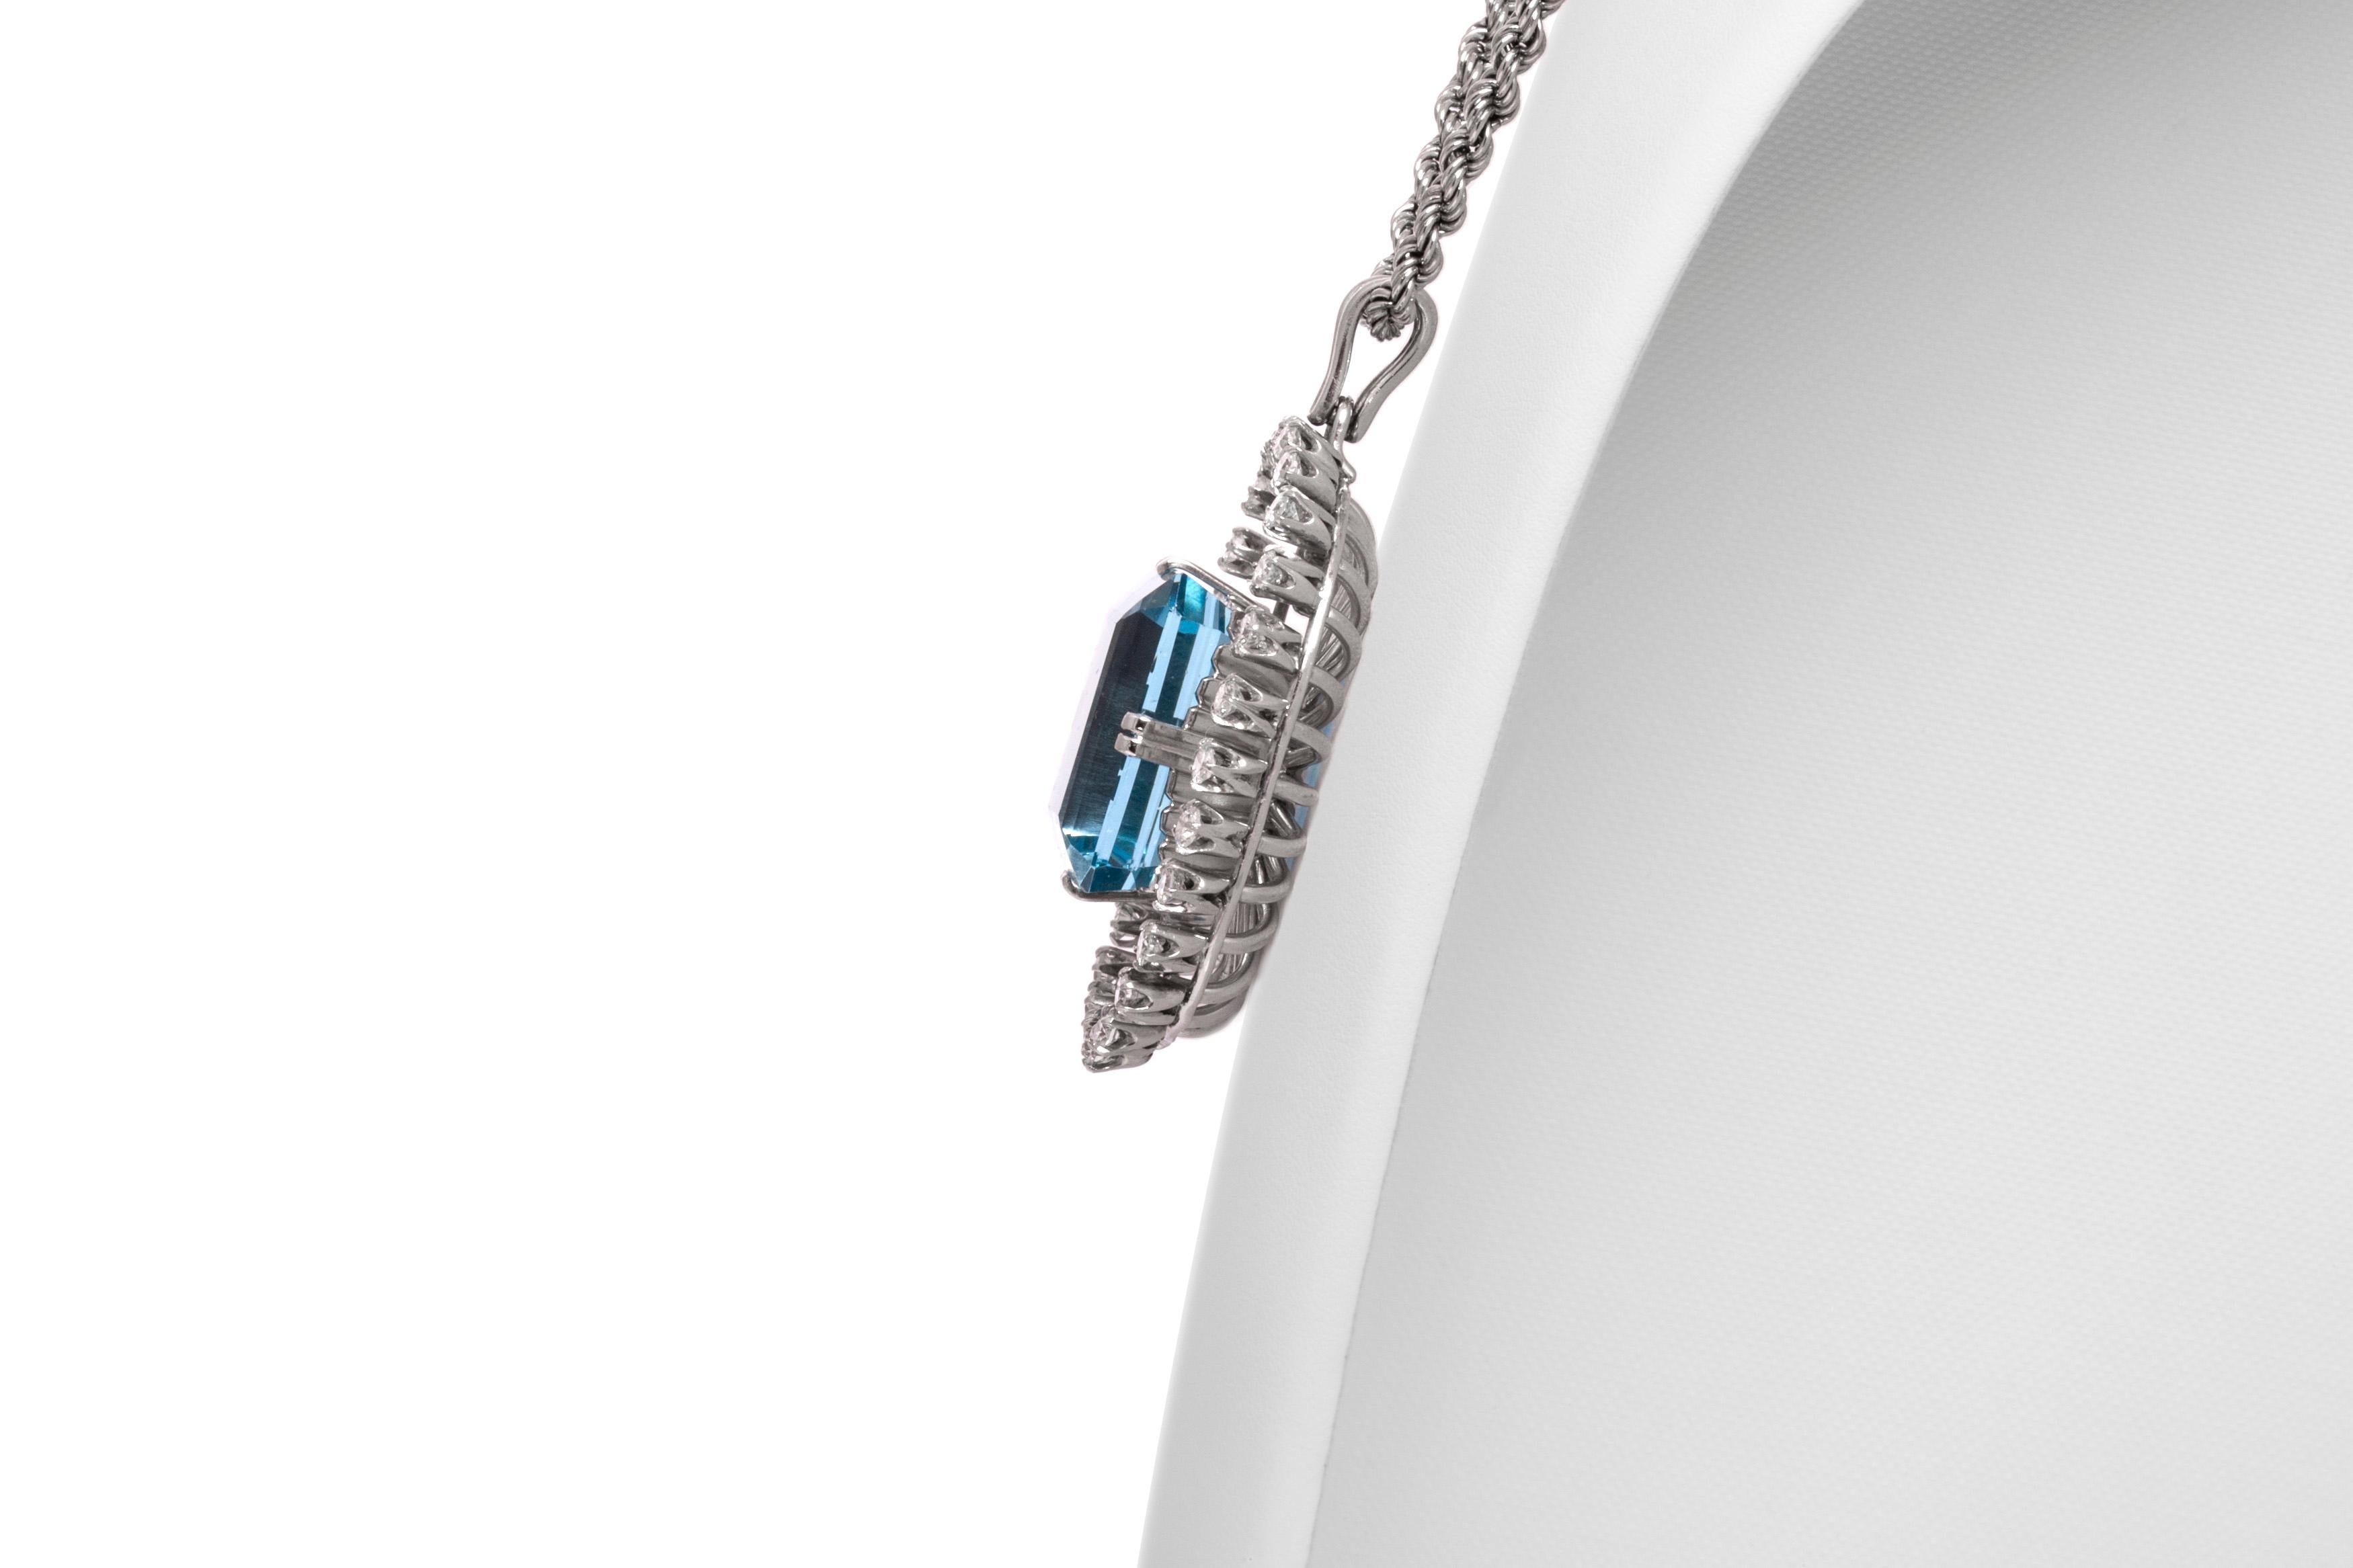 Necklace, finely crafted in platinum with an aquamarine pendant weighing approximately a total of 40.00 carats and diamonds around weighing approximately a total of 2.00 carats. Circa 1940's.